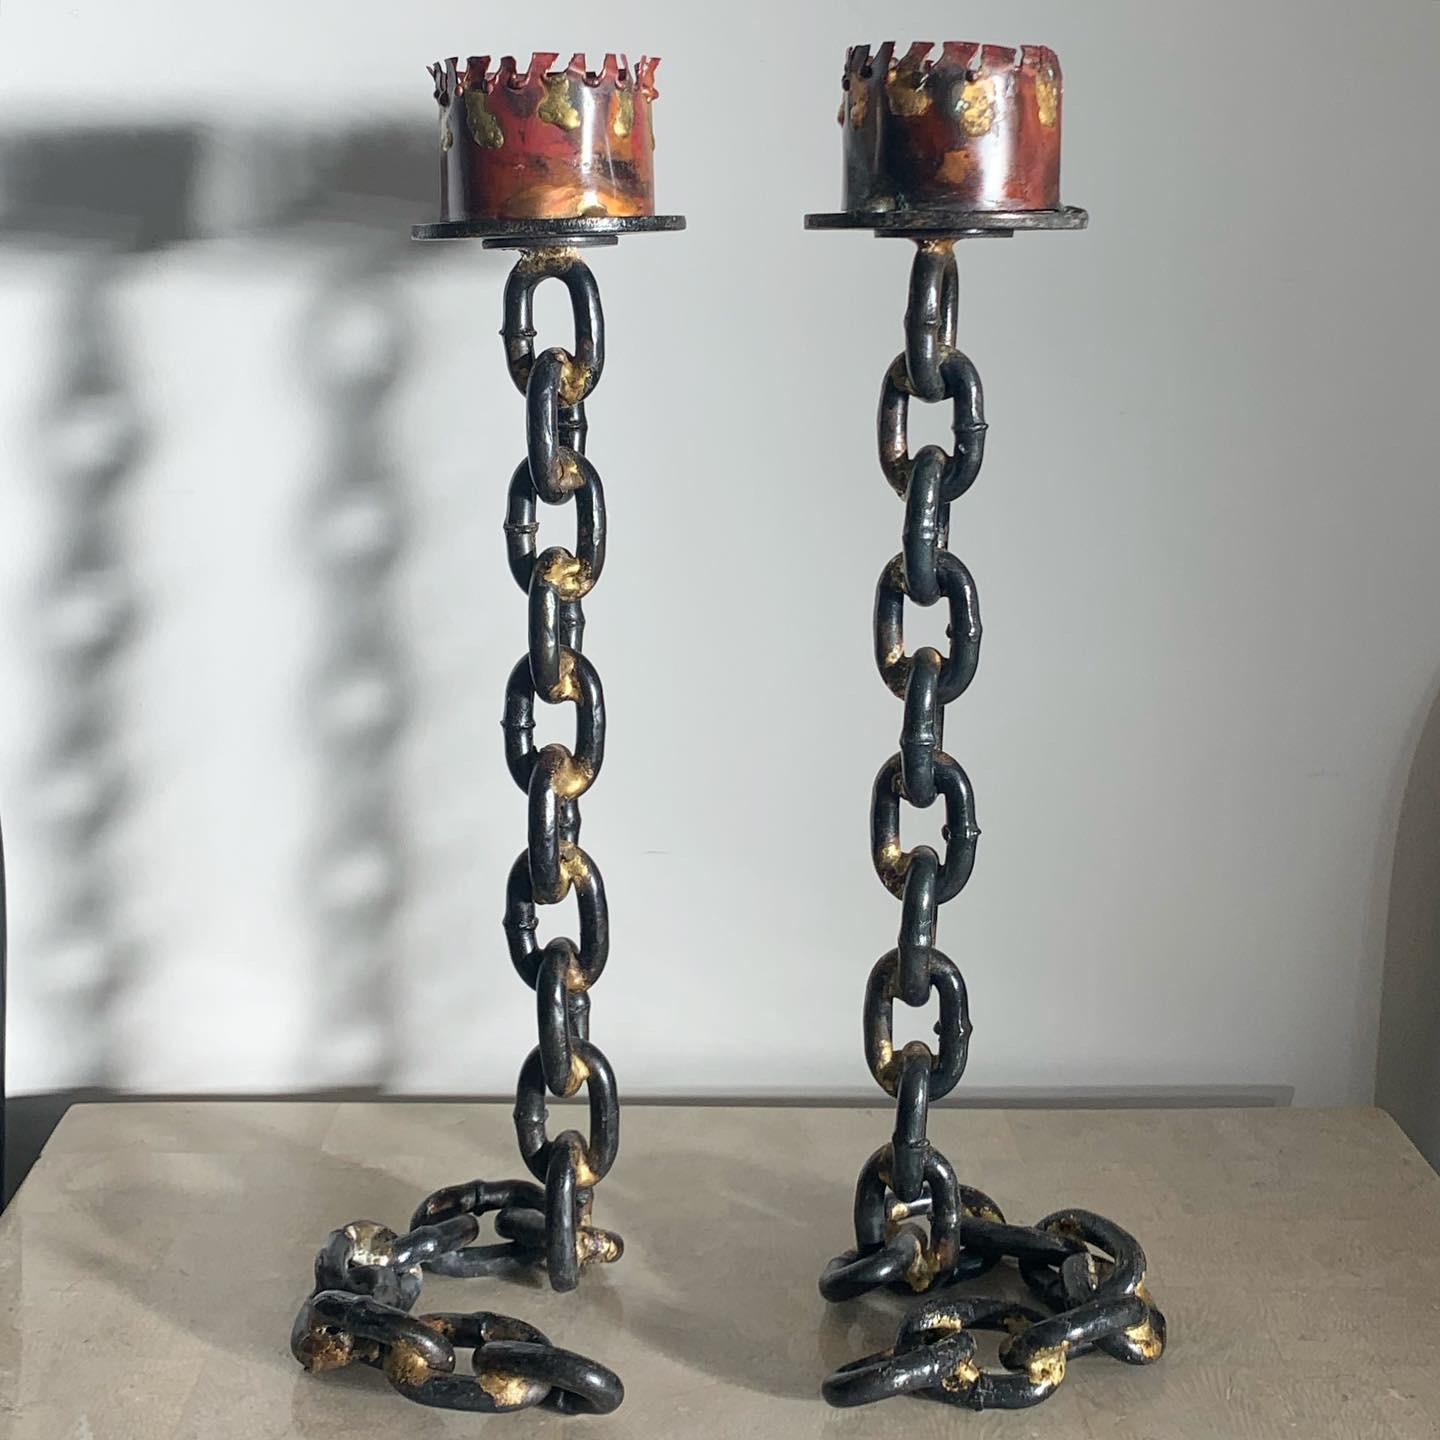 Iconic 1970s vintage welded cast iron chain candleholders. This design was definitely the 70s-does-Gothic look that began in France and eventually spawned the whole dark shadows fever / culture. High end, heavy. Each holds about a 2-2.5” block